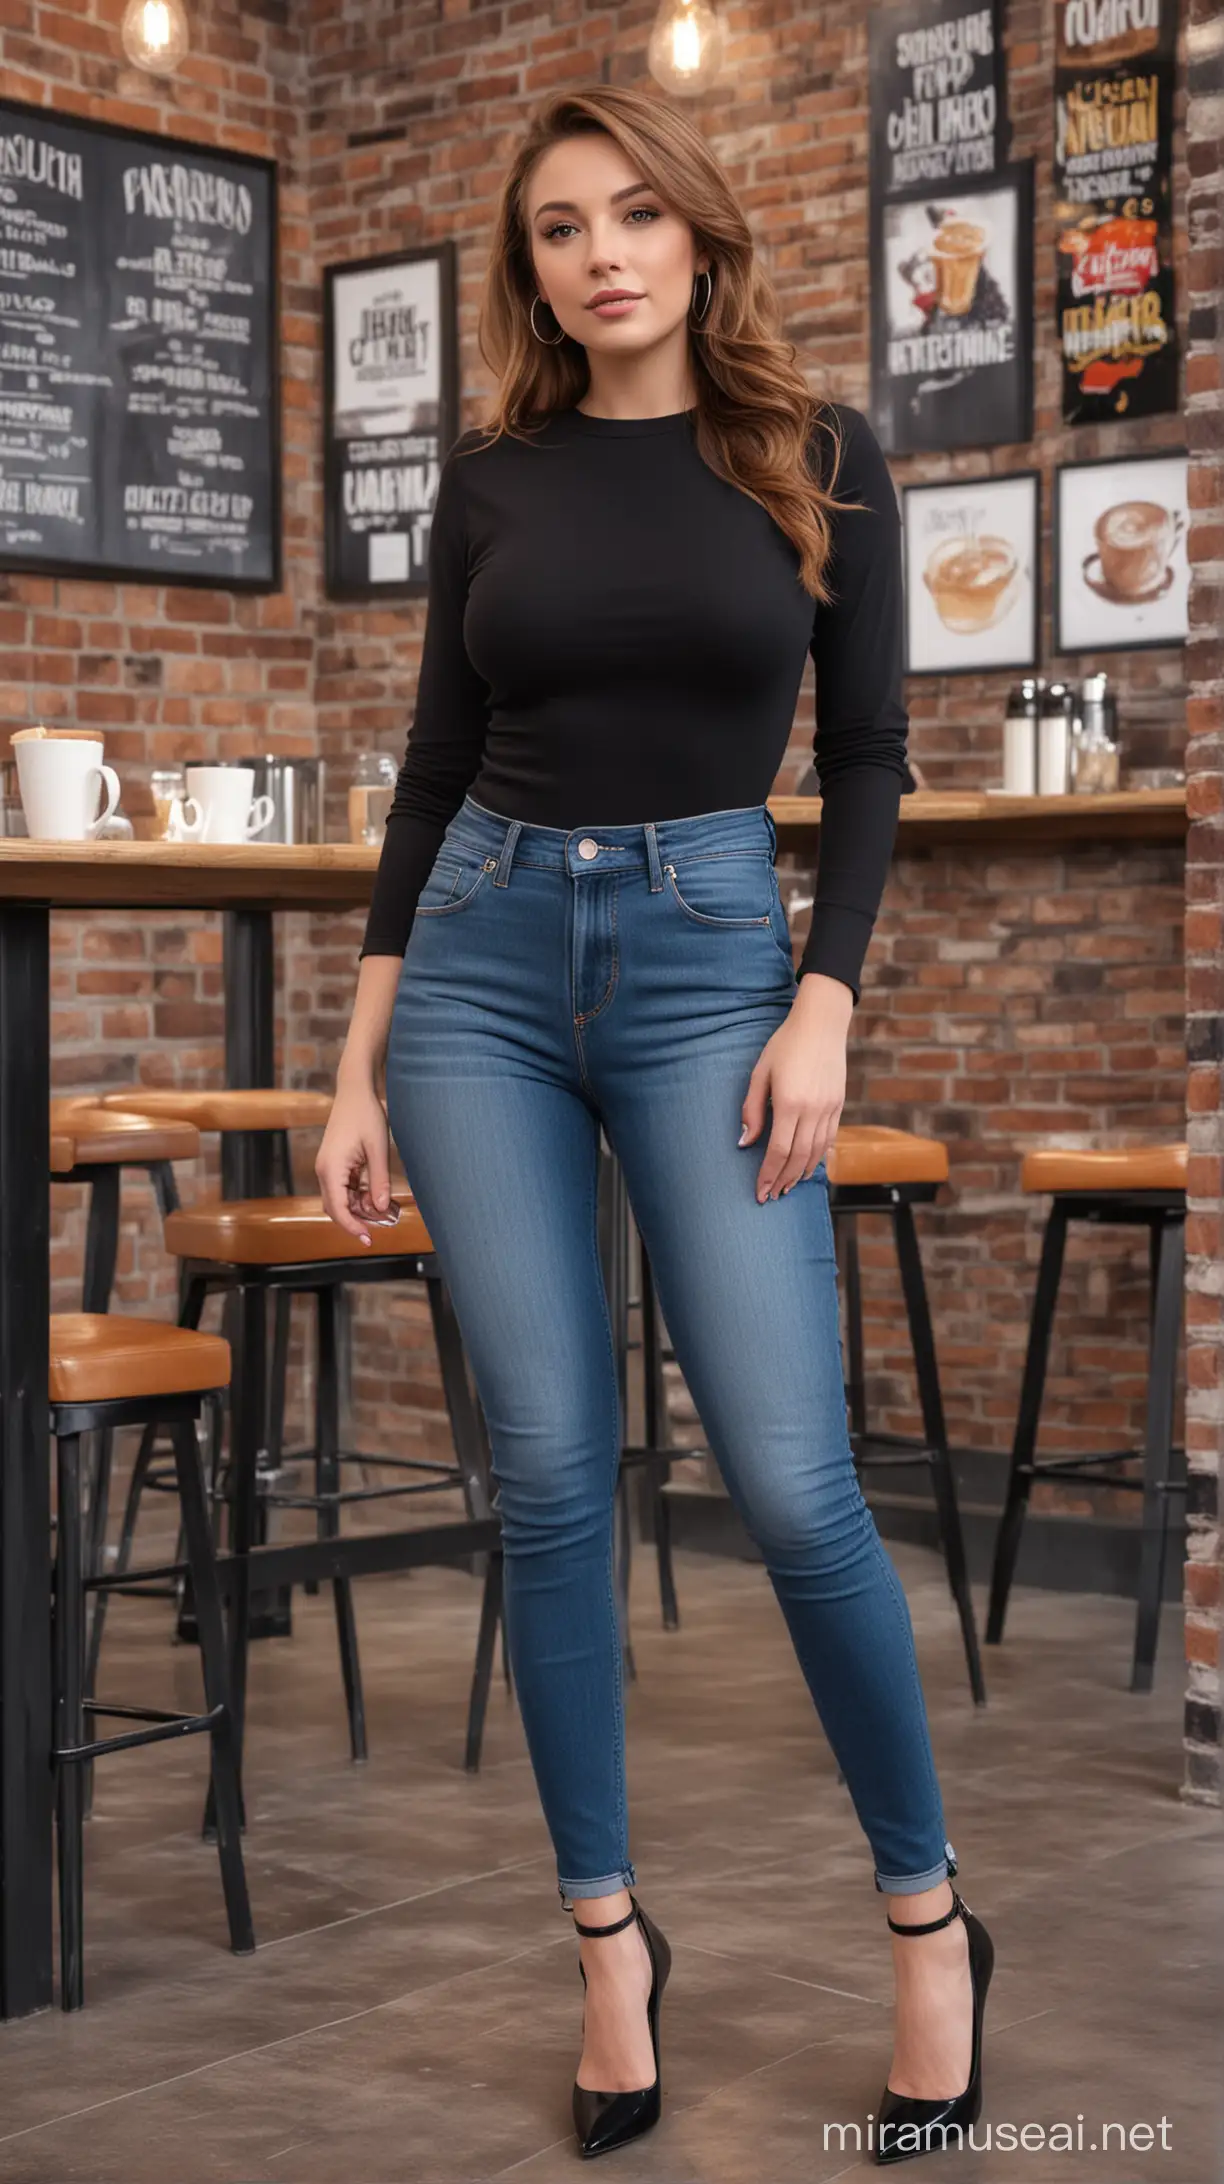 Stylish American Woman in Colorful Denim and Black Shirt at Urban Coffee Shop